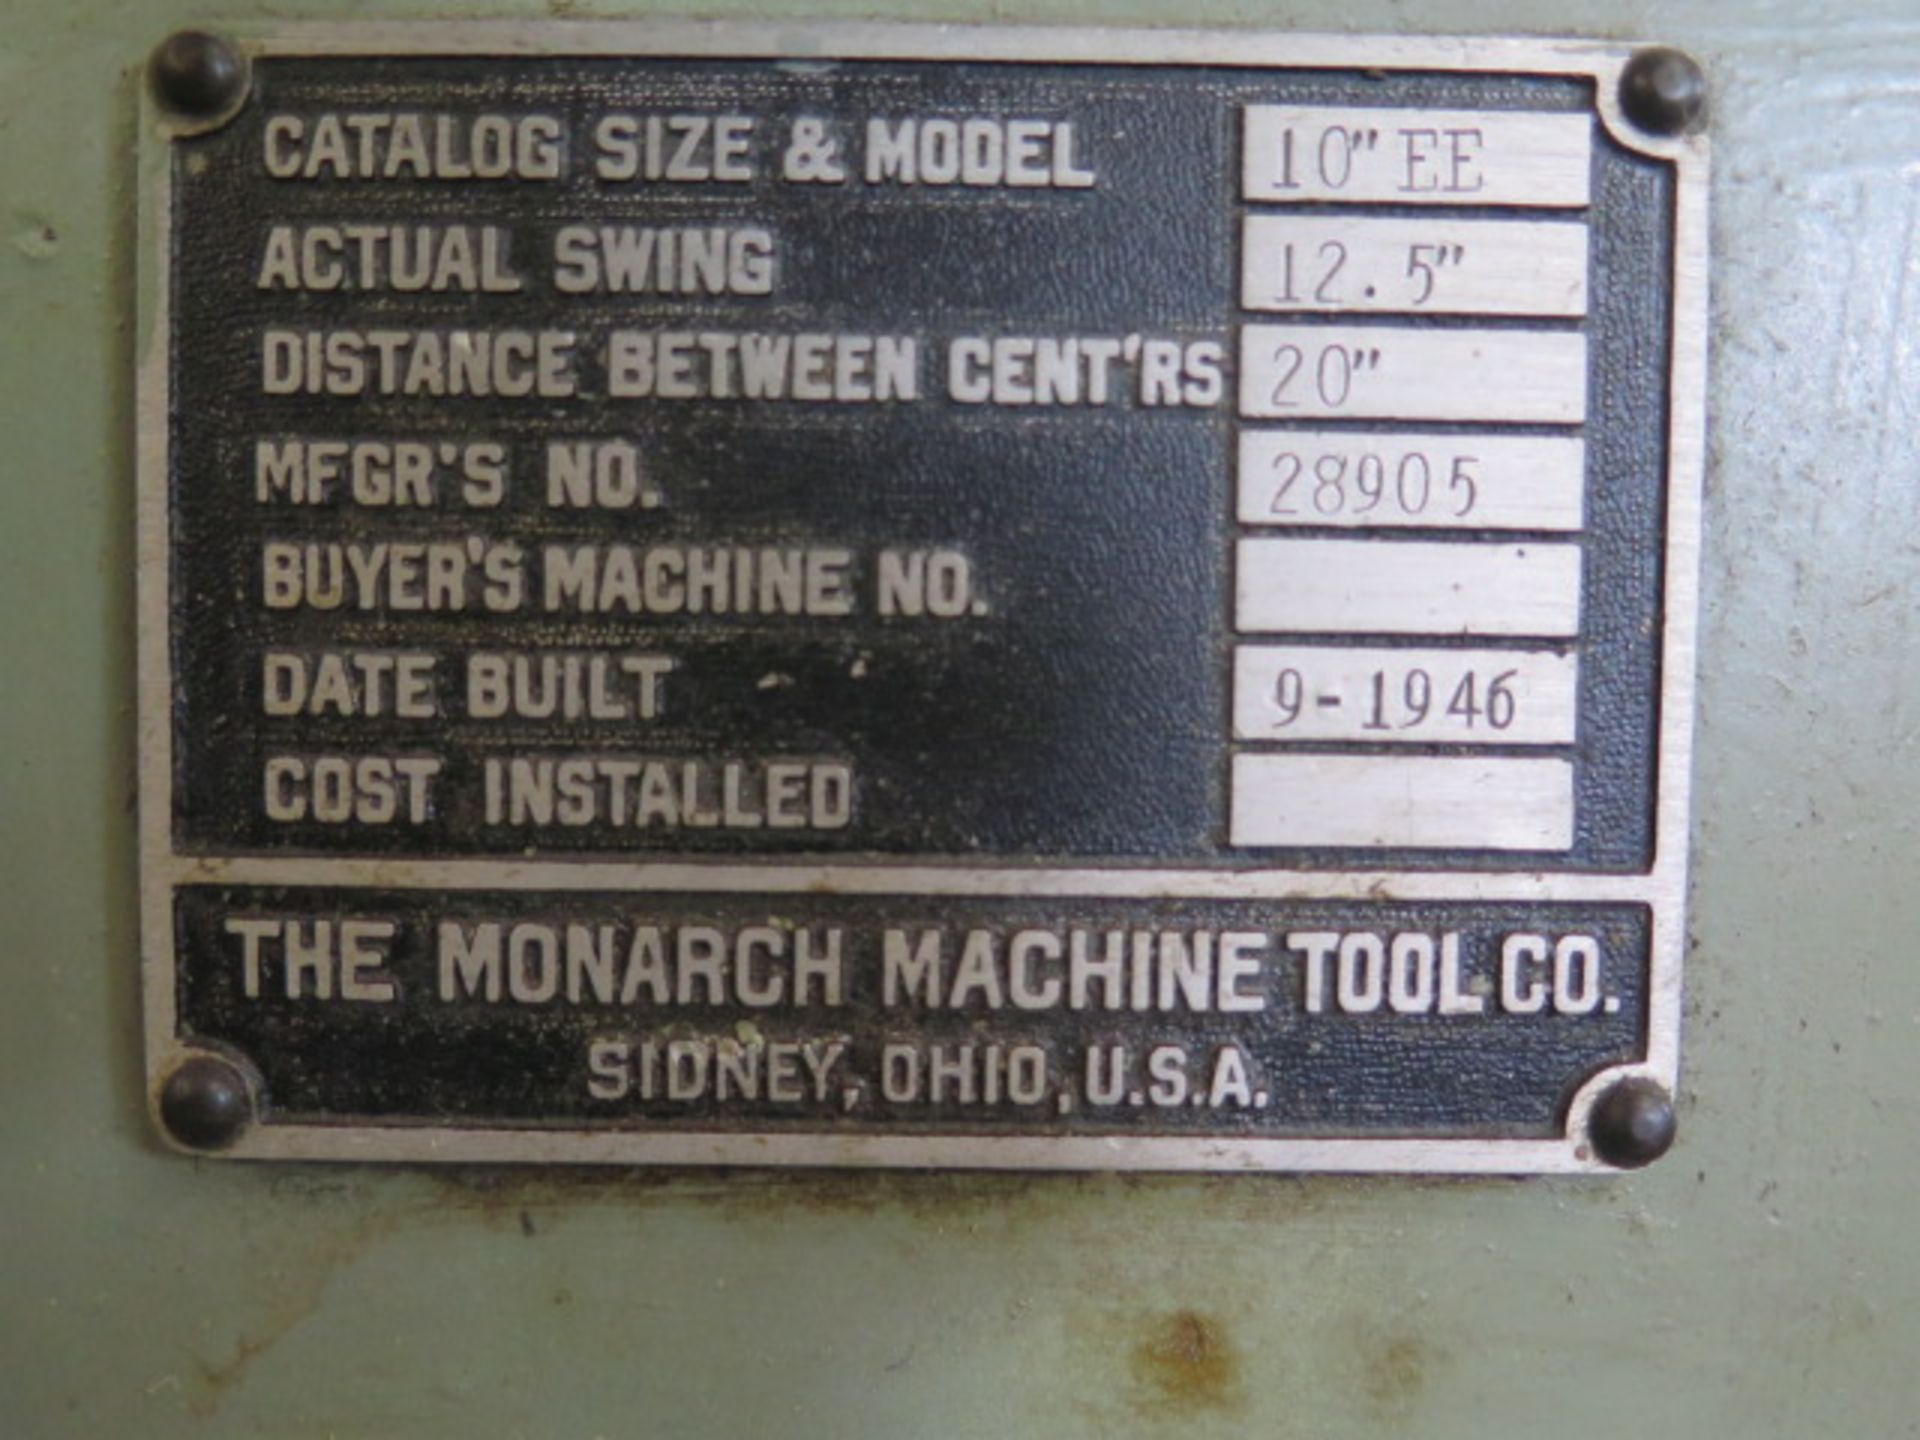 Monarch mdl. 10EE 12 ½” x 20” Tool Room Lathe s/n 28905 w/ 2500 Max RPM, Dial RPM Gage, Inch - Image 9 of 9